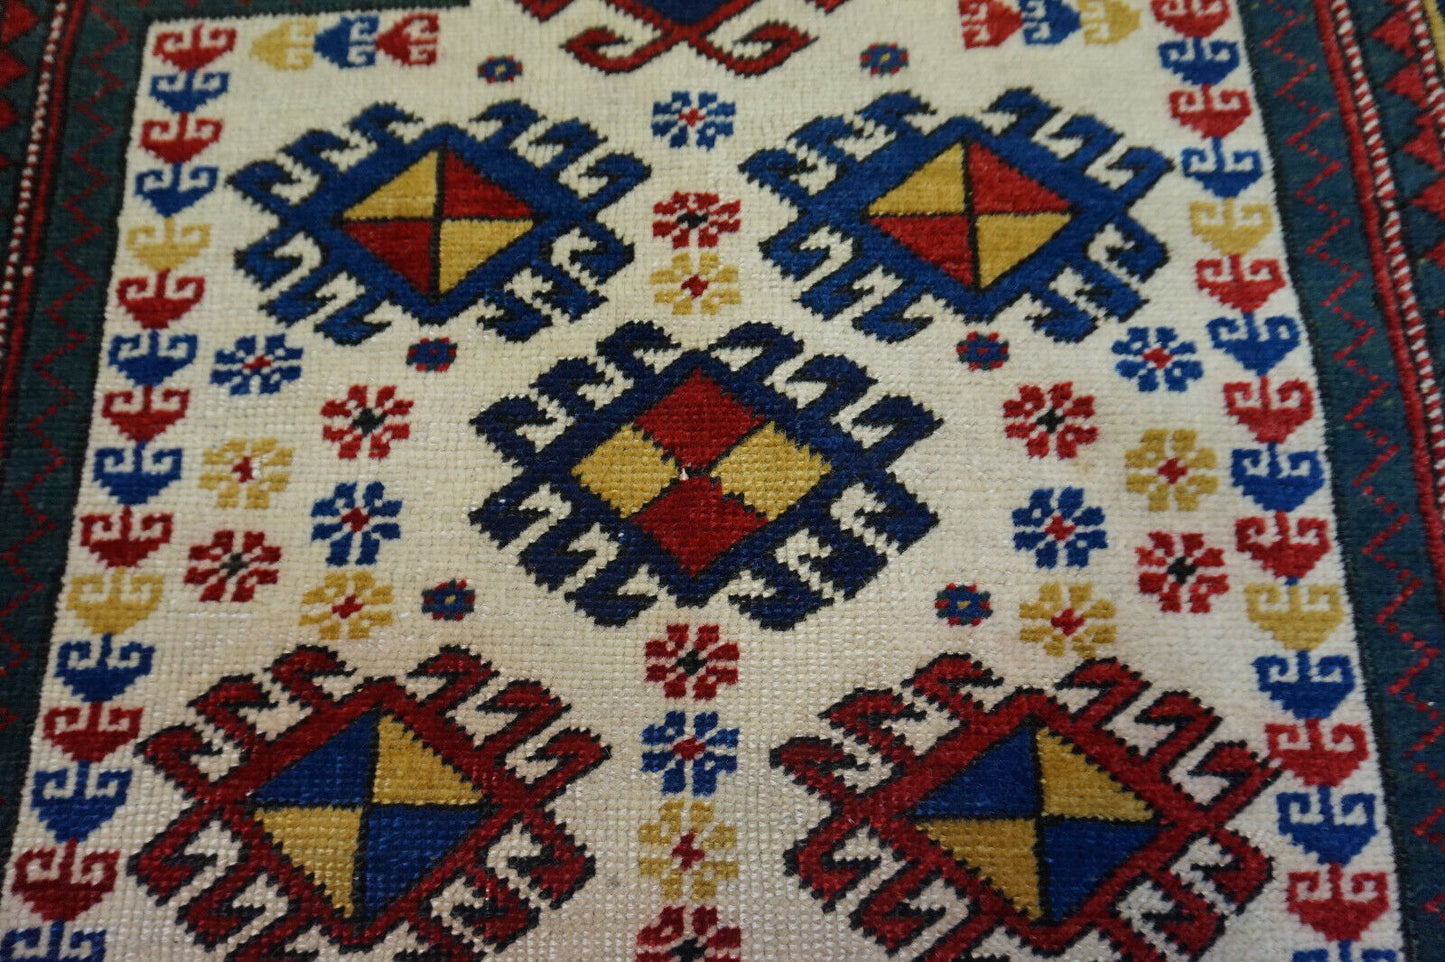 Close-up of the white background dominating the central field on the Handmade Antique Caucasian Kazak Prayer Rug